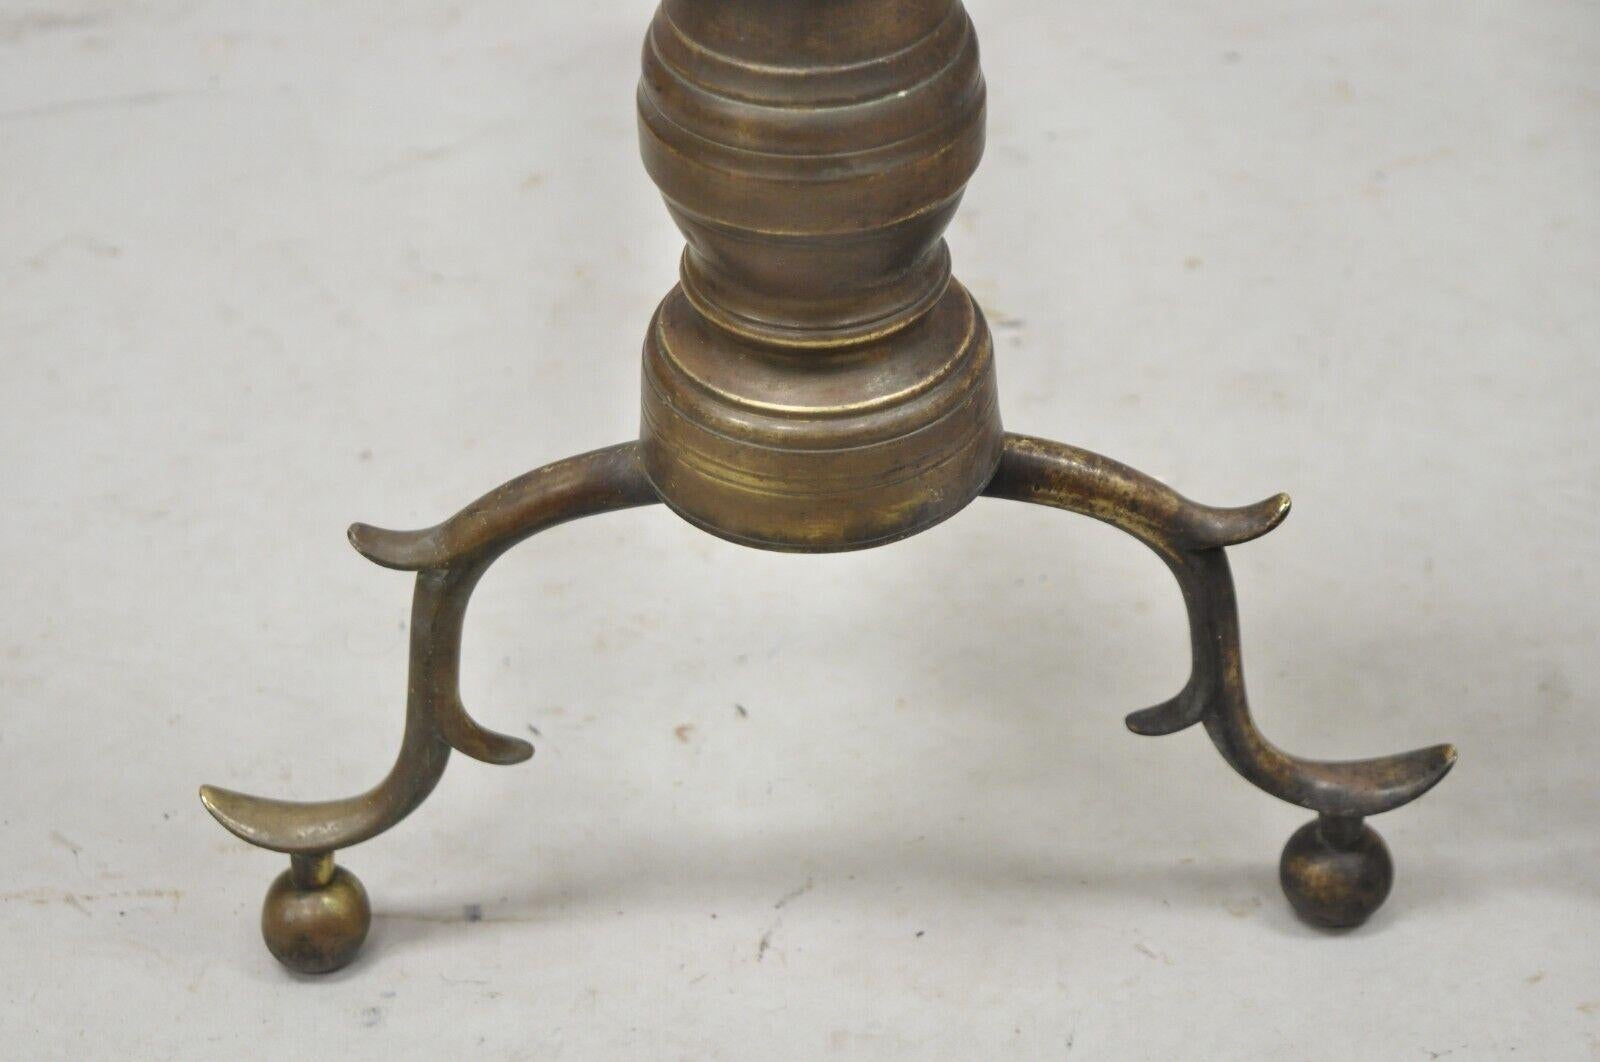 Antique Brass Federal Branch Leg Urn Finial Cast Iron Andirons - a Pair For Sale 6